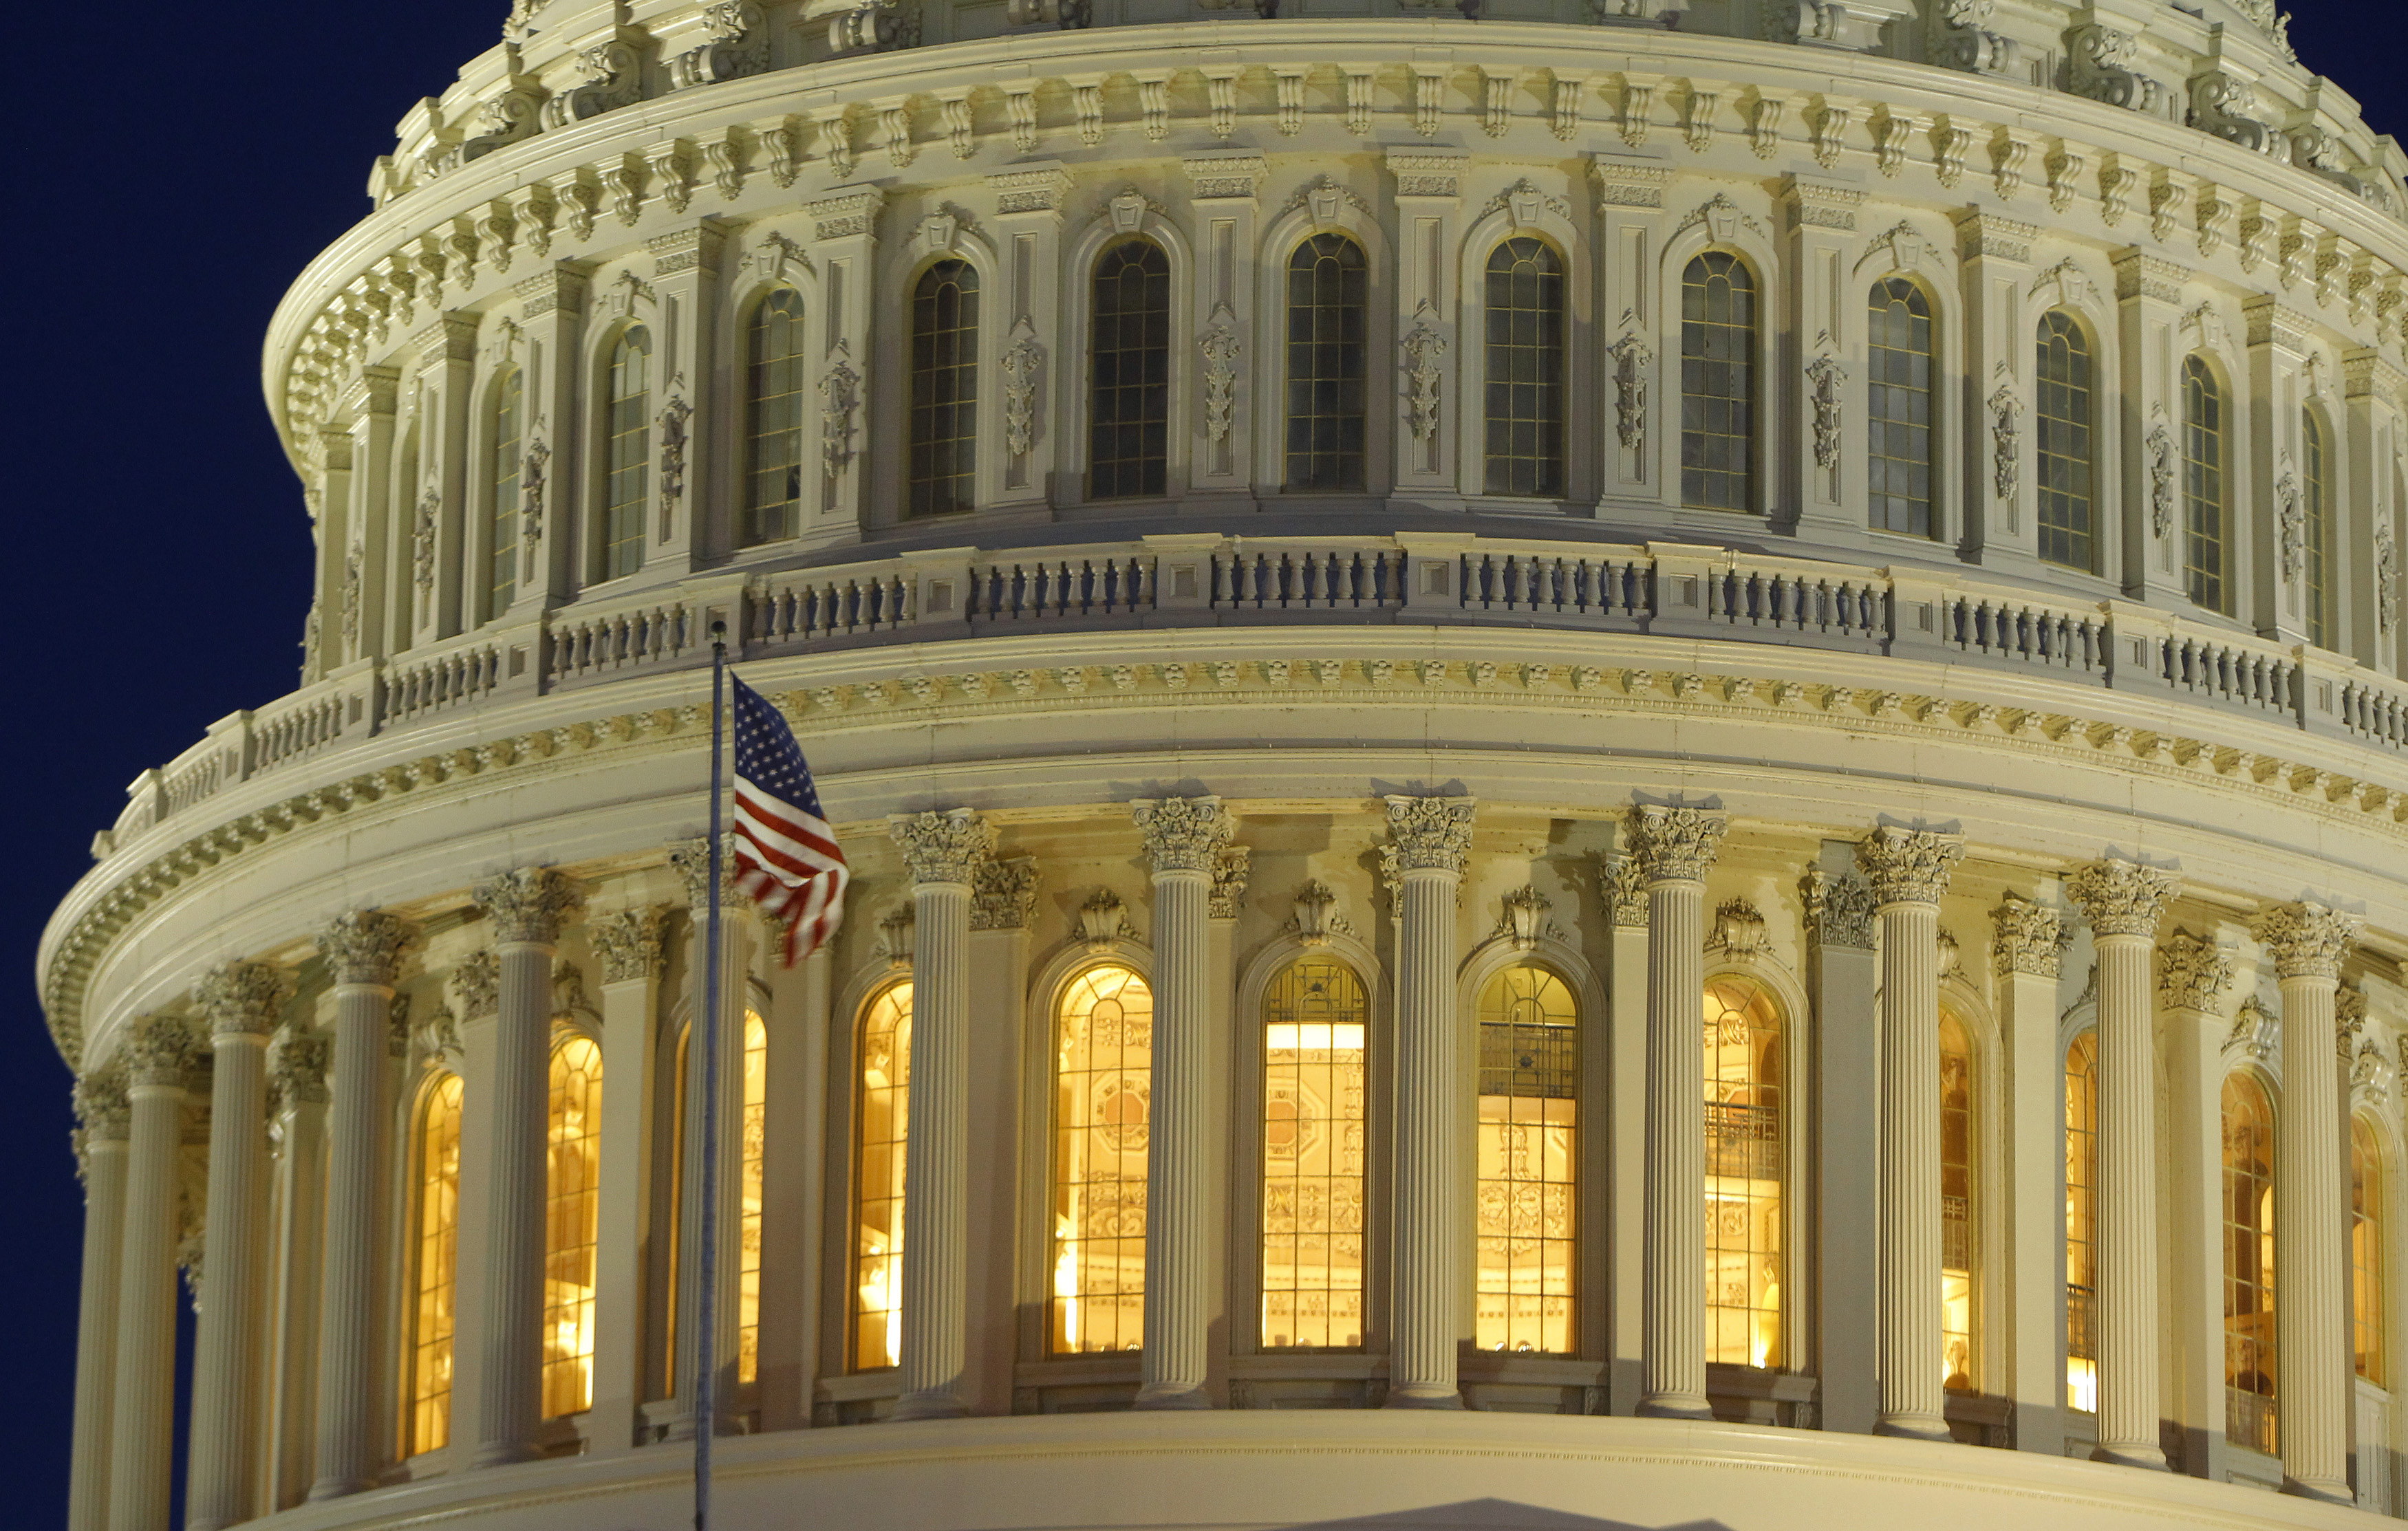 The United States Capitol Dome is seen before dawn in Washington